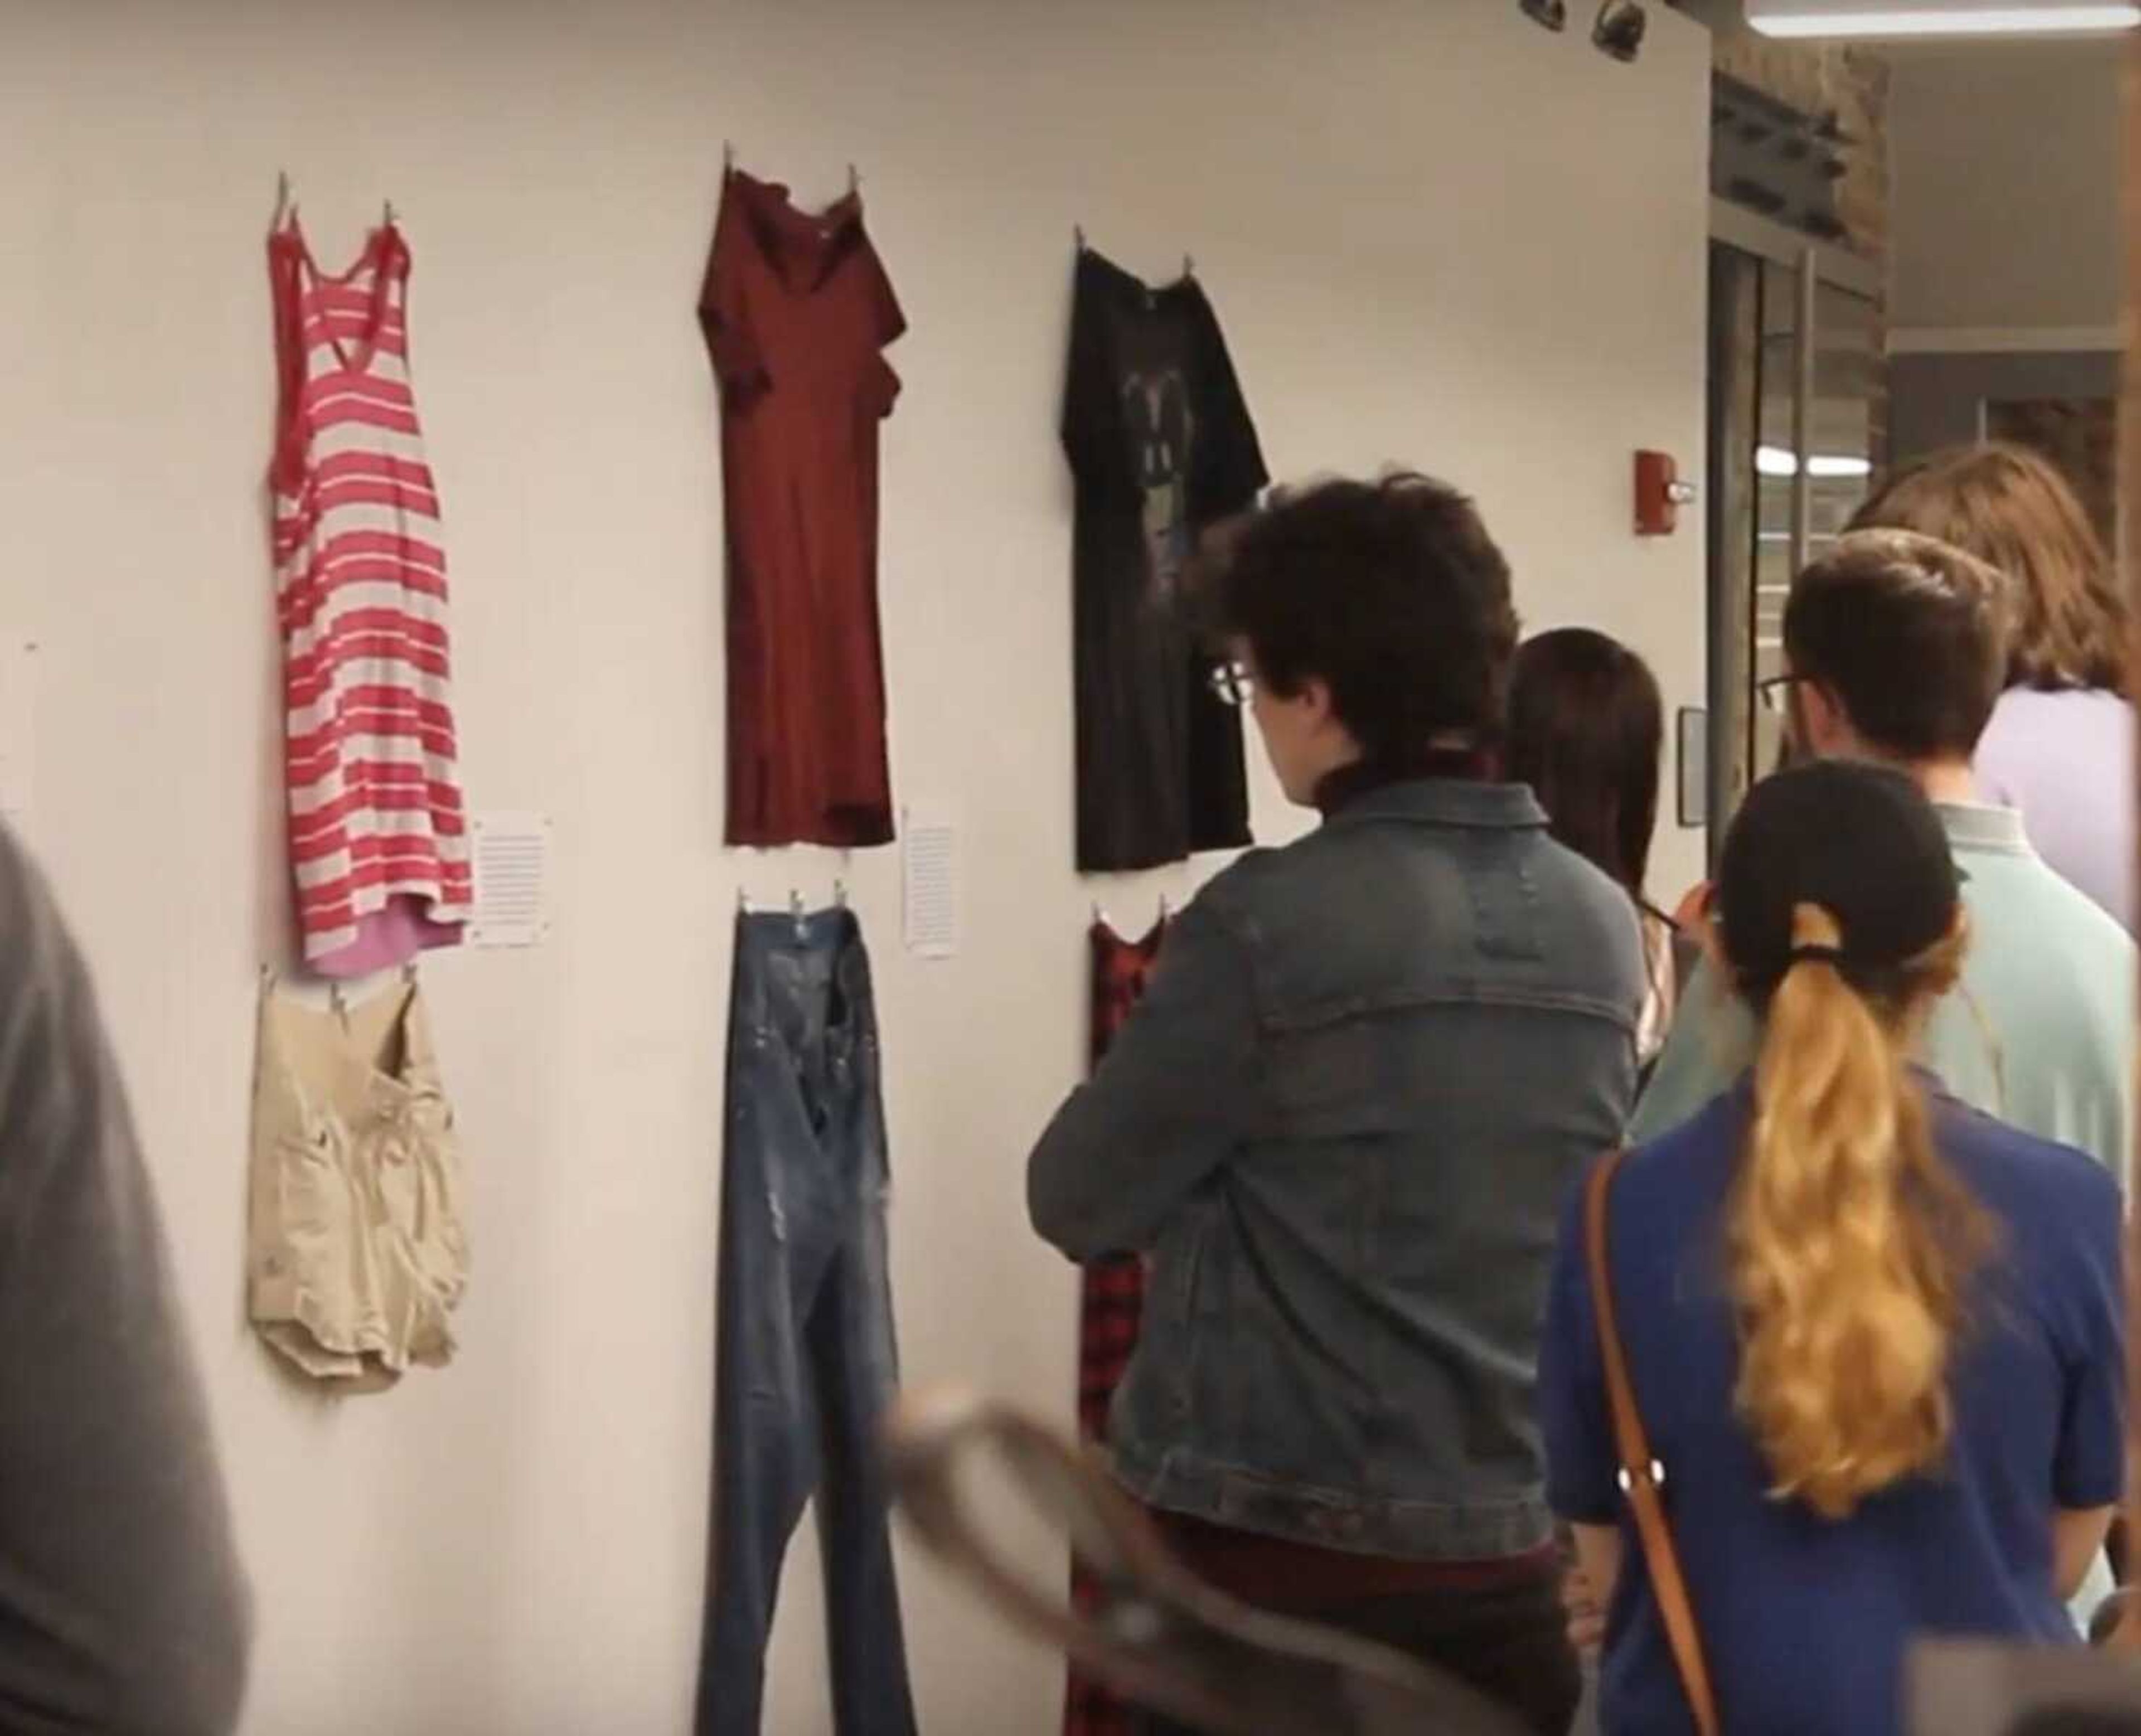 Catapult holds “What Were You Wearing” exhibit during Sexual Assault Awareness Month